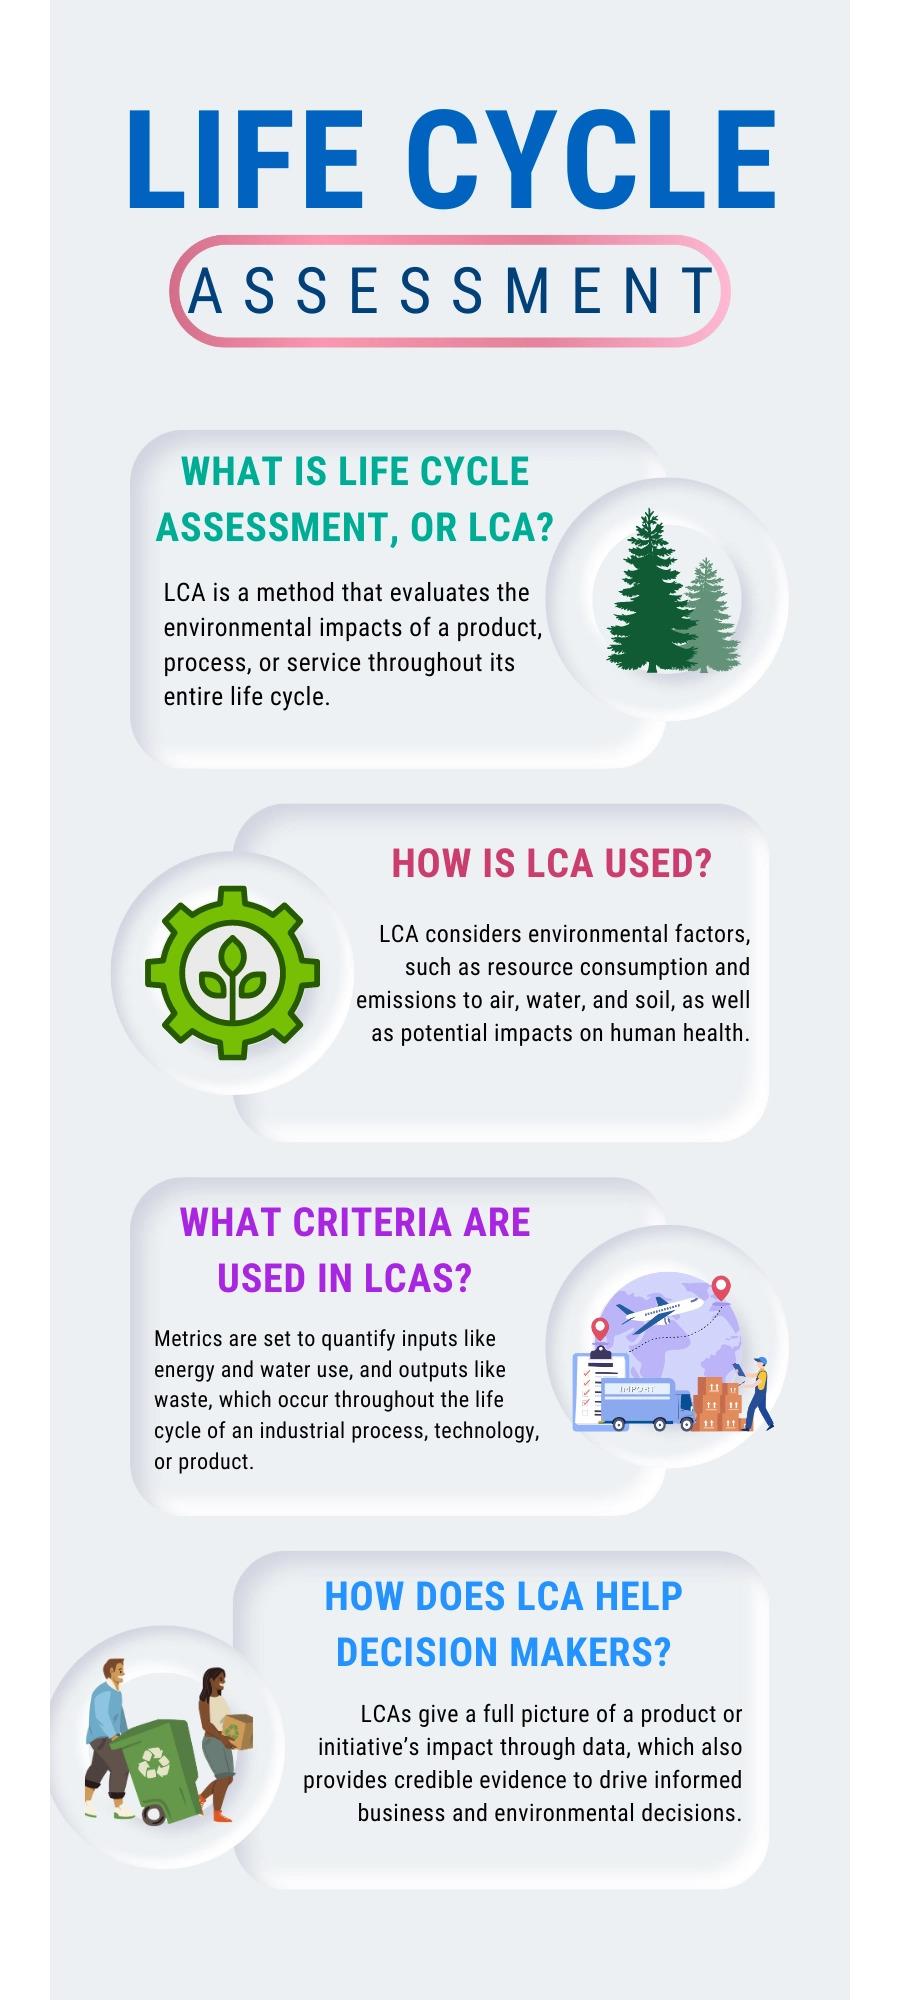 Info graphic "Life Cycle Assessment" Topic of What is life Cycle Assessment, How is LCA used, What criteria are used, How does LCA help.